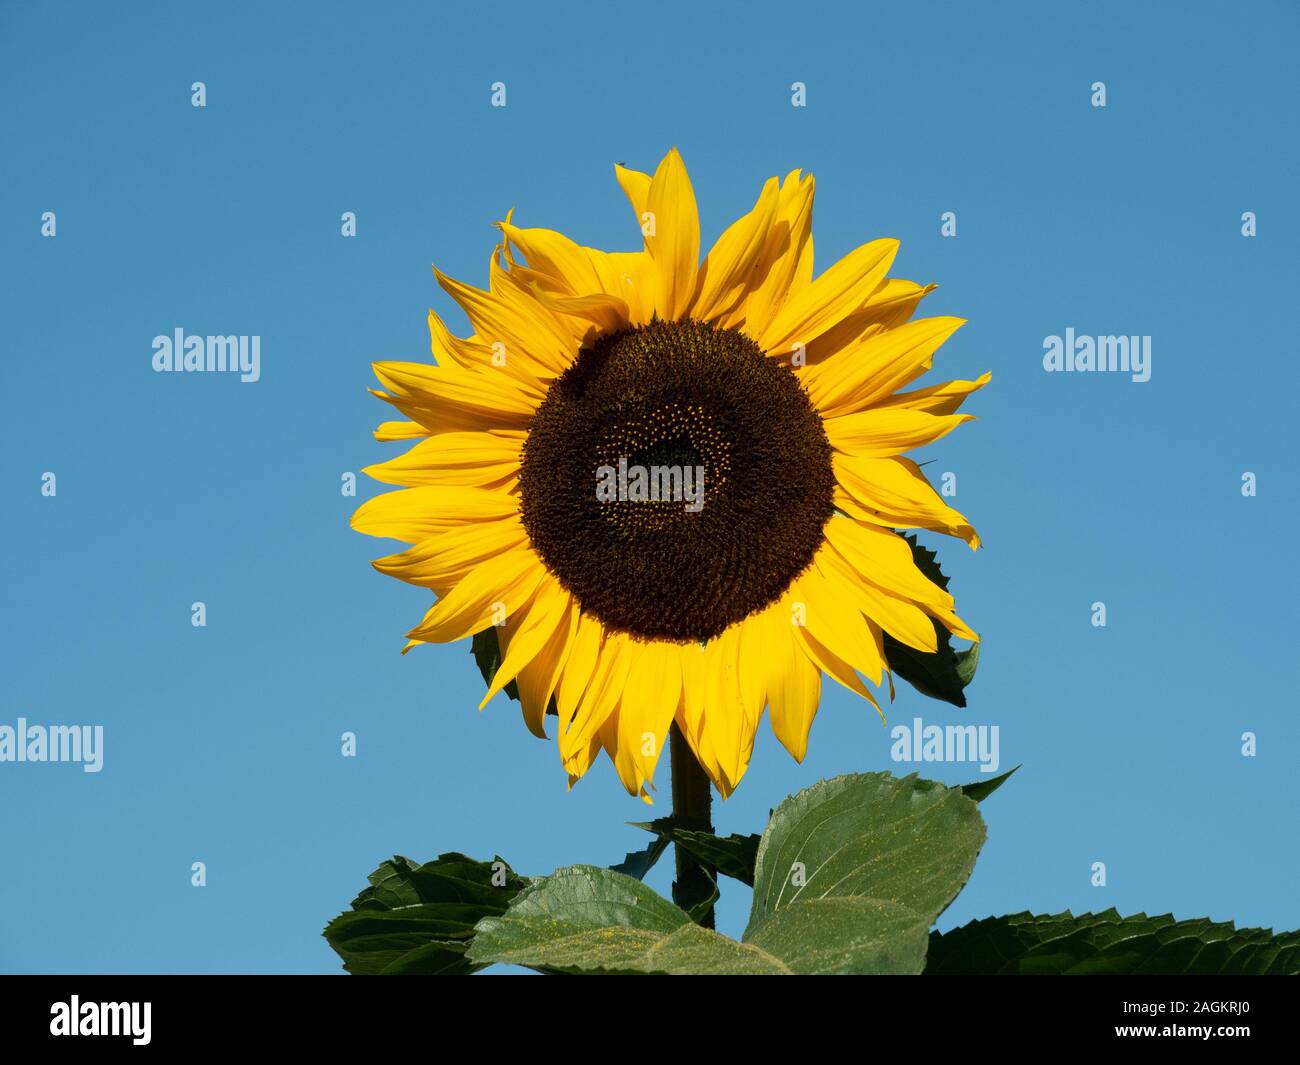 A single large sunflower against a clear blue background Stock Photo